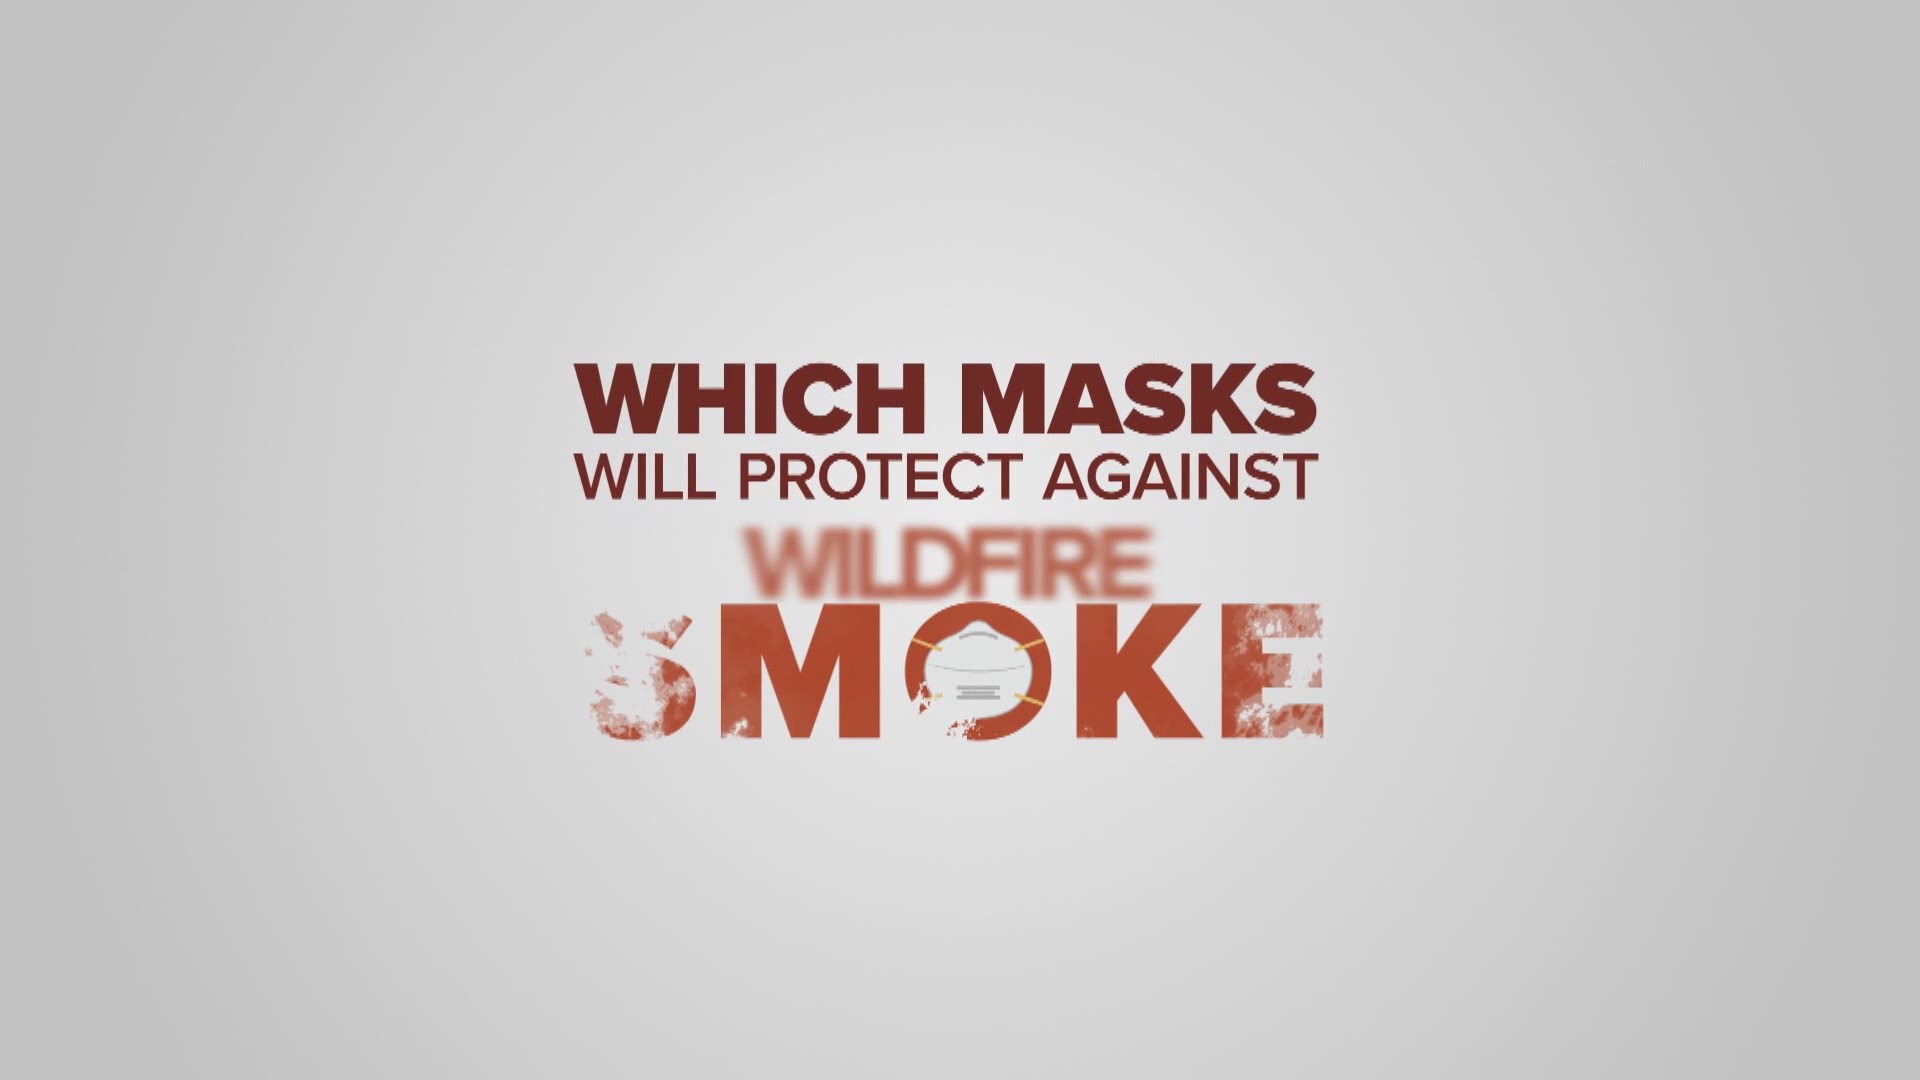 According to the CDC, wildfire smoke can irritate your lungs, cause inflammation and make you more prone to lung infections.